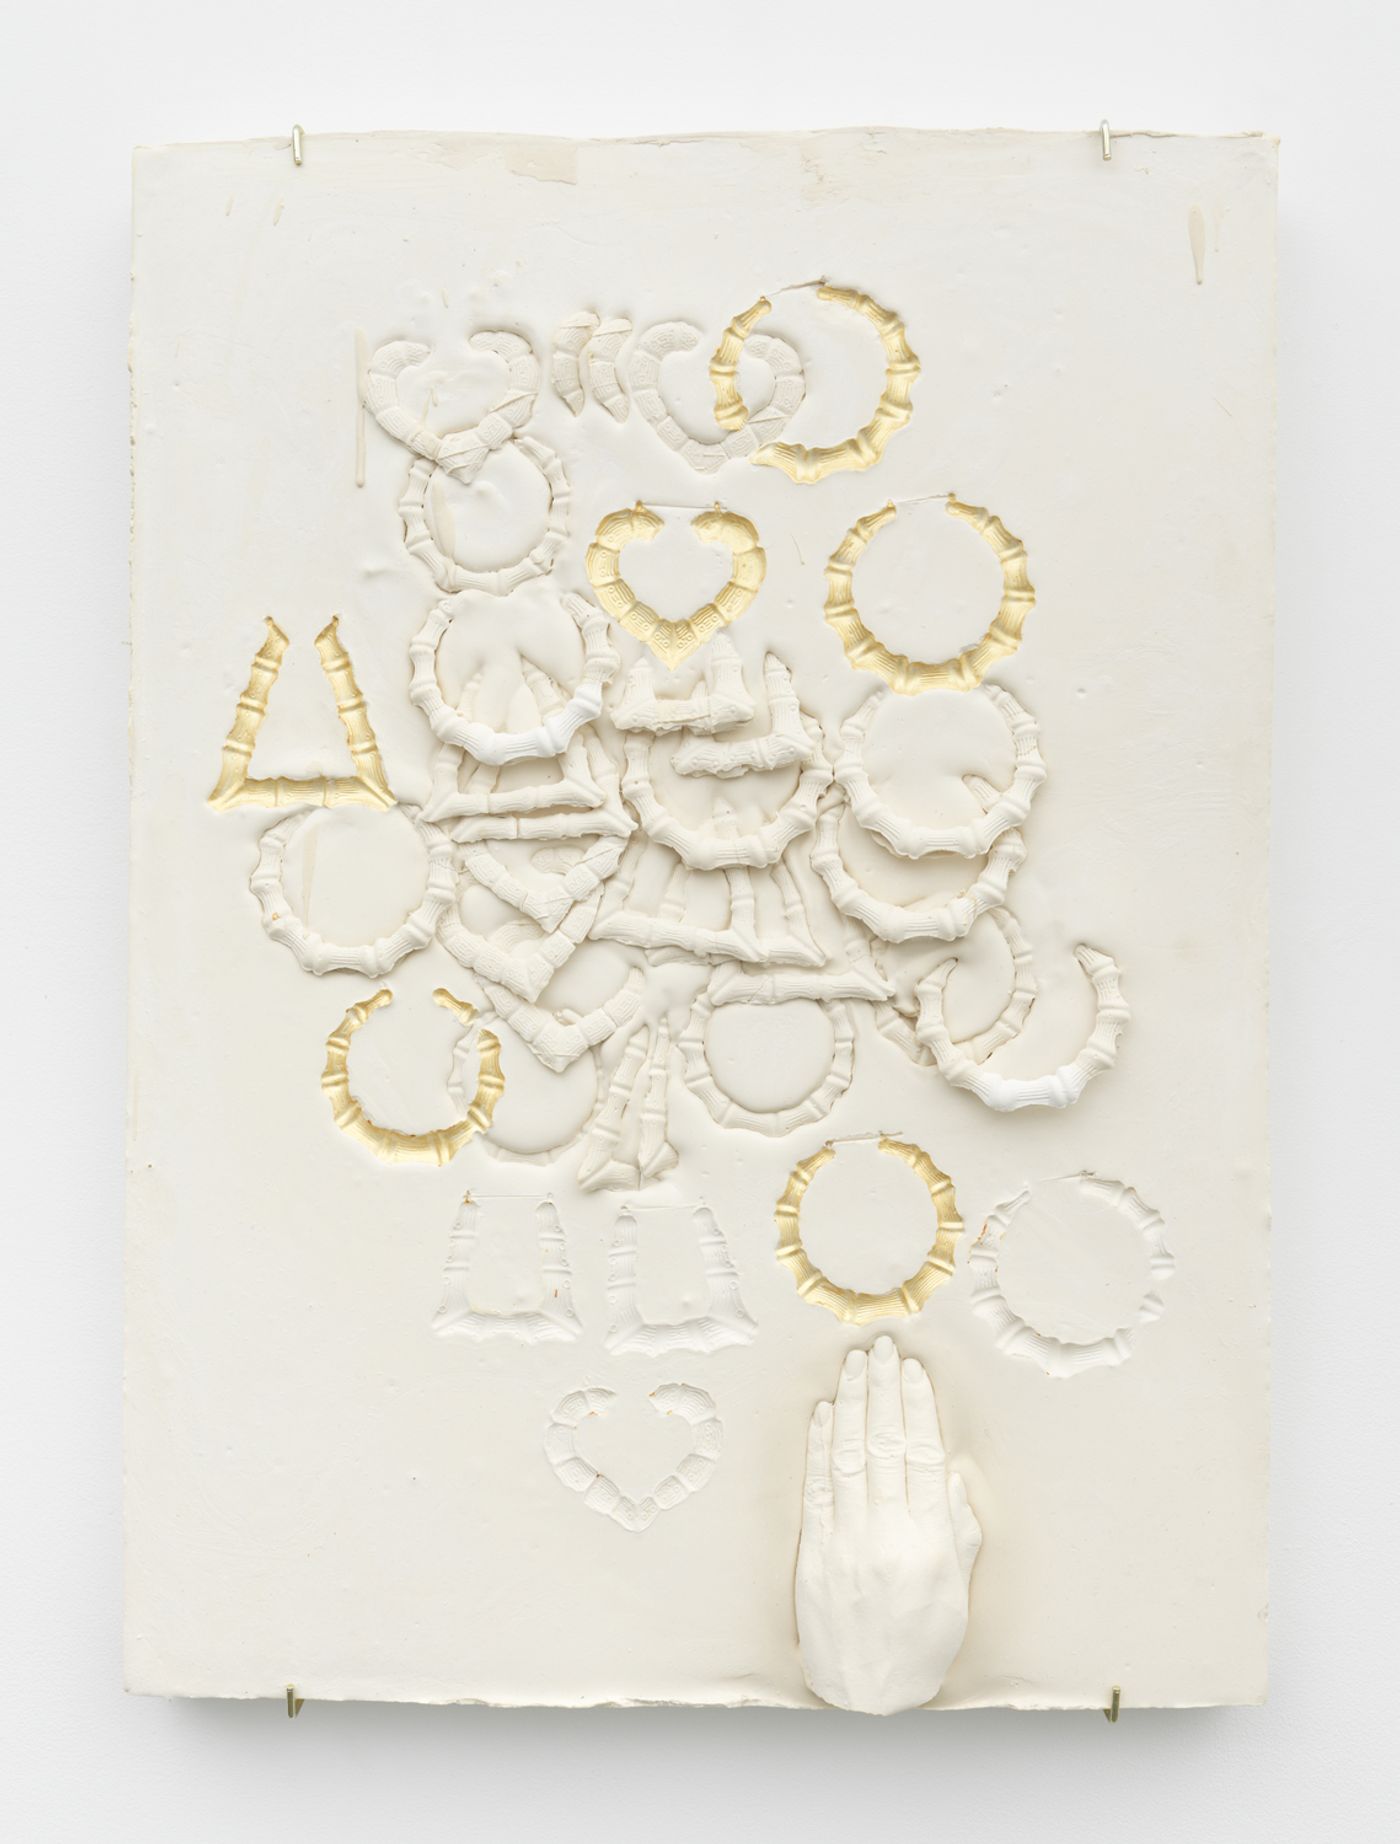 Image of Composition with Bamboo Earrings, Impressed with Gold Overlapping with Hand , 2019: Plaster, foam, and acrylic